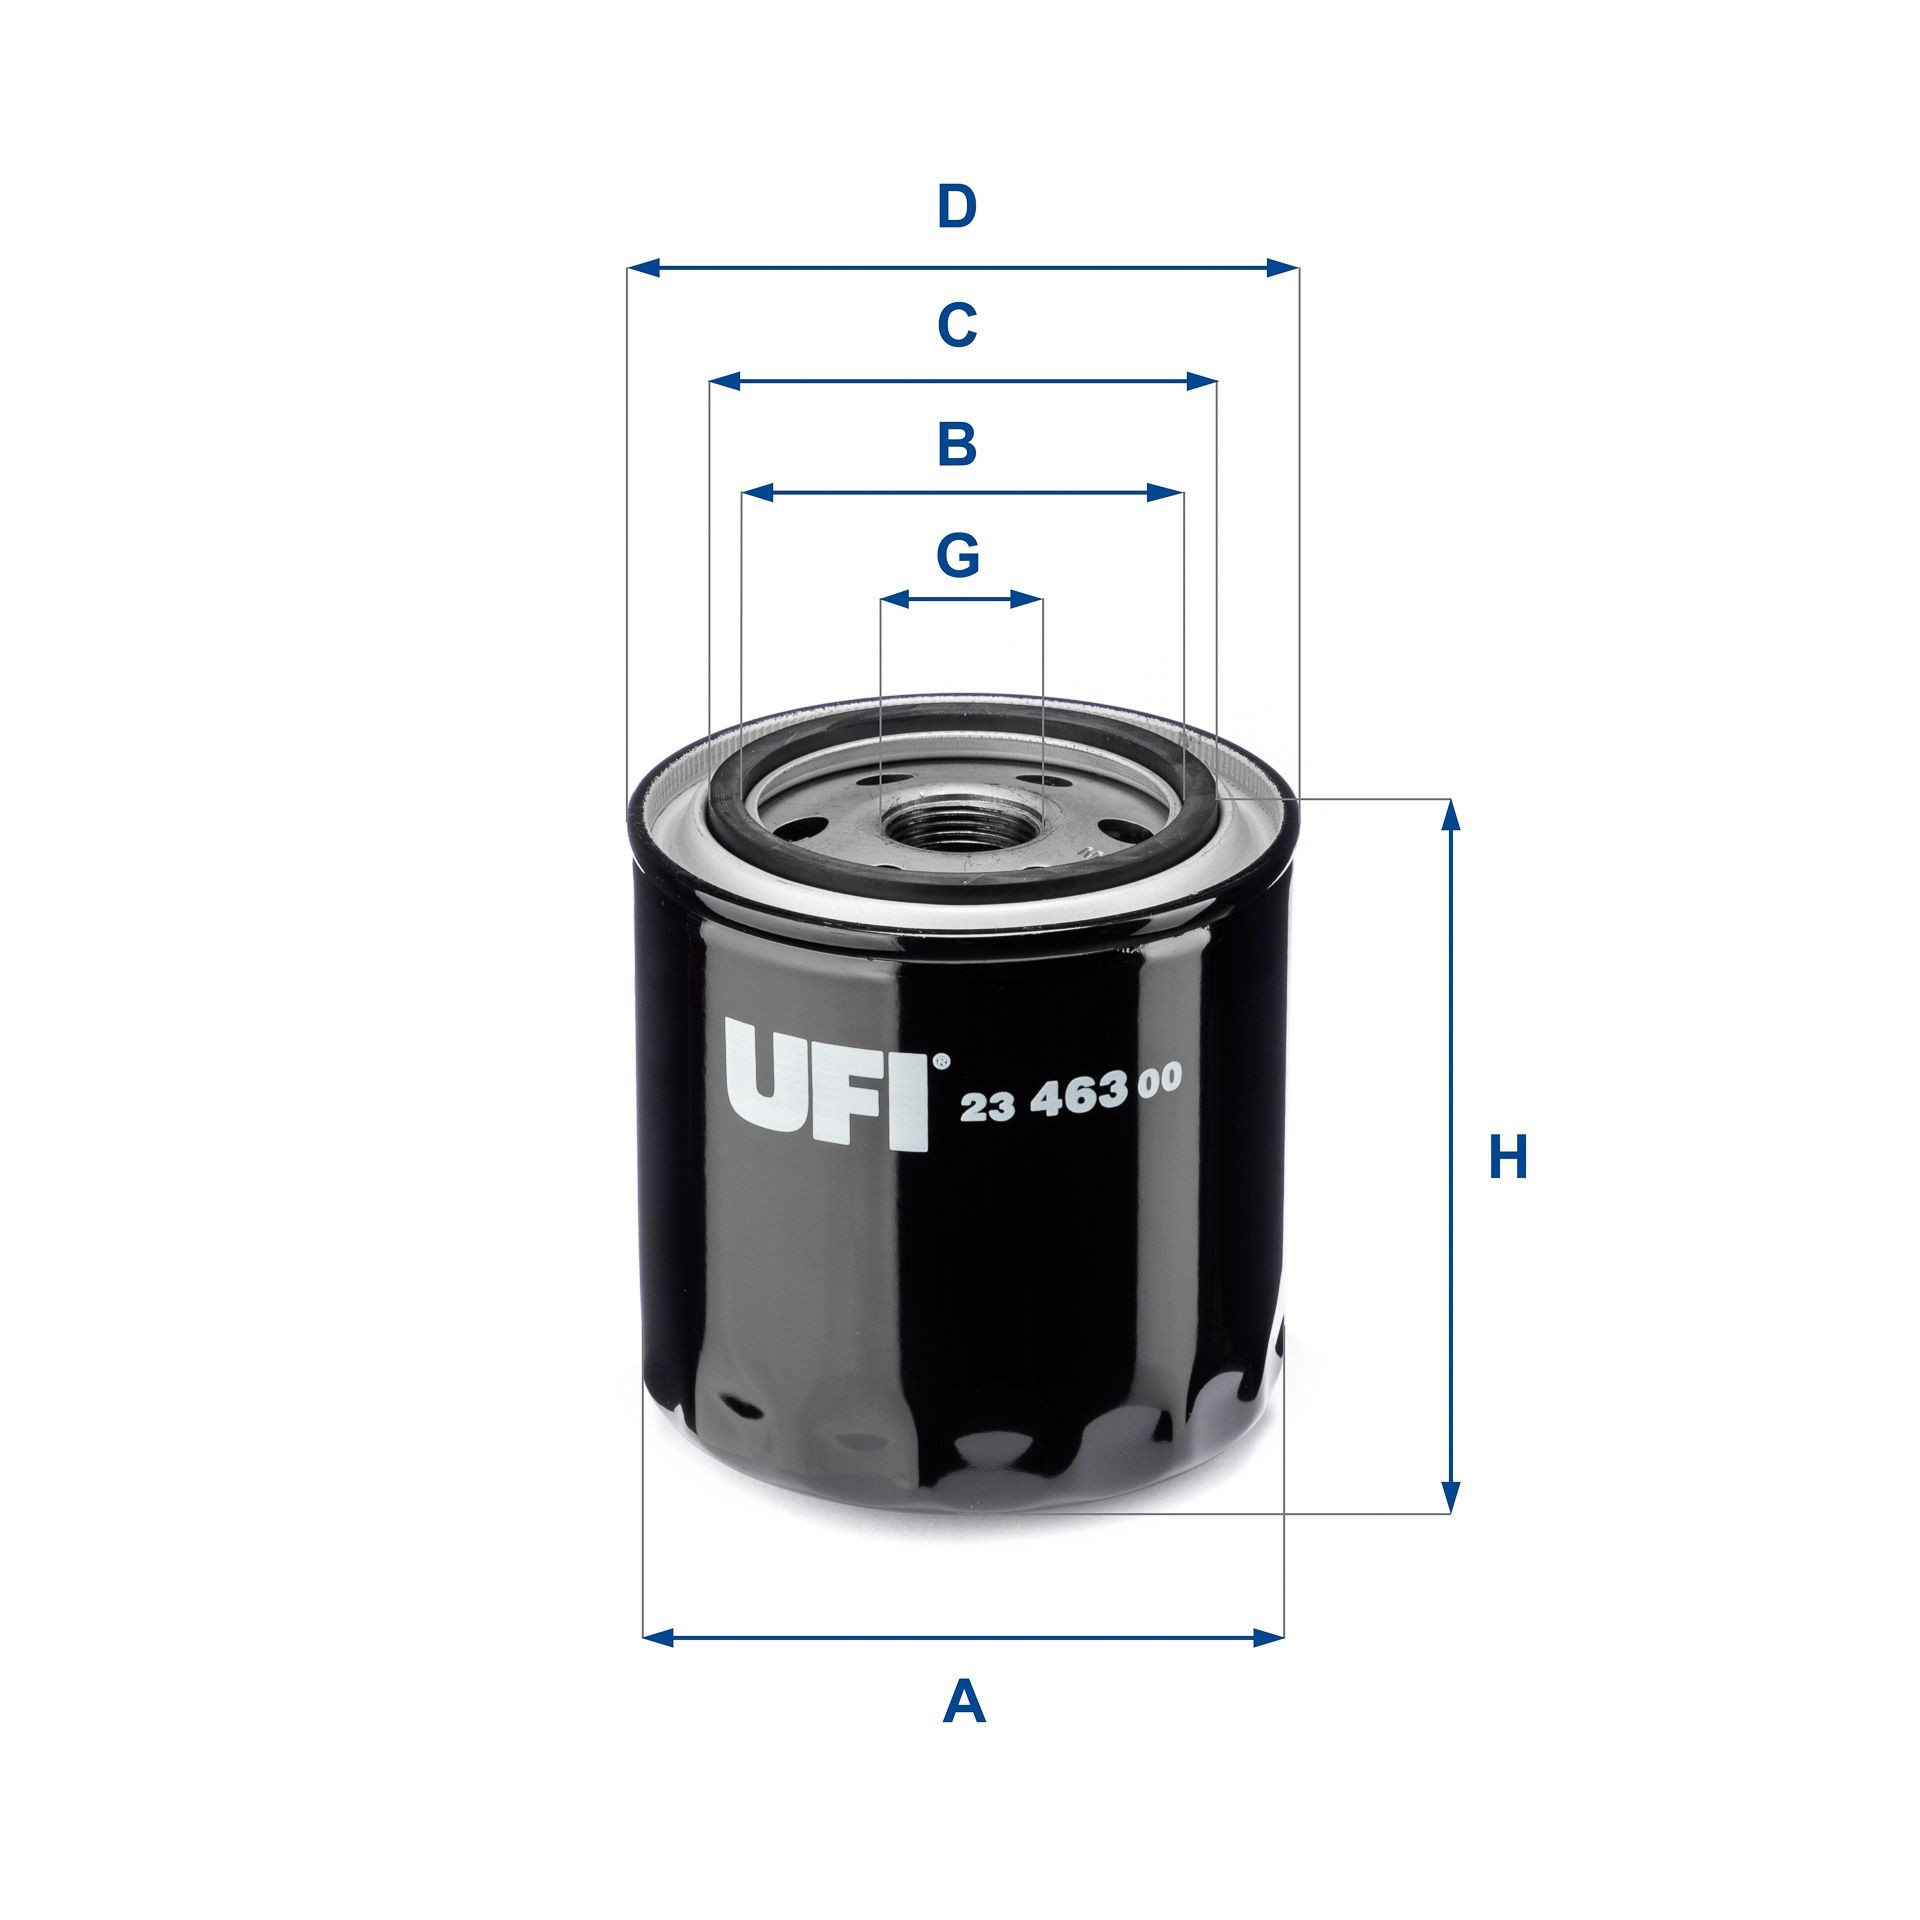 UFI 23.463.00 Oil filter M 22 X 1,5, with one anti-return valve, Spin-on Filter